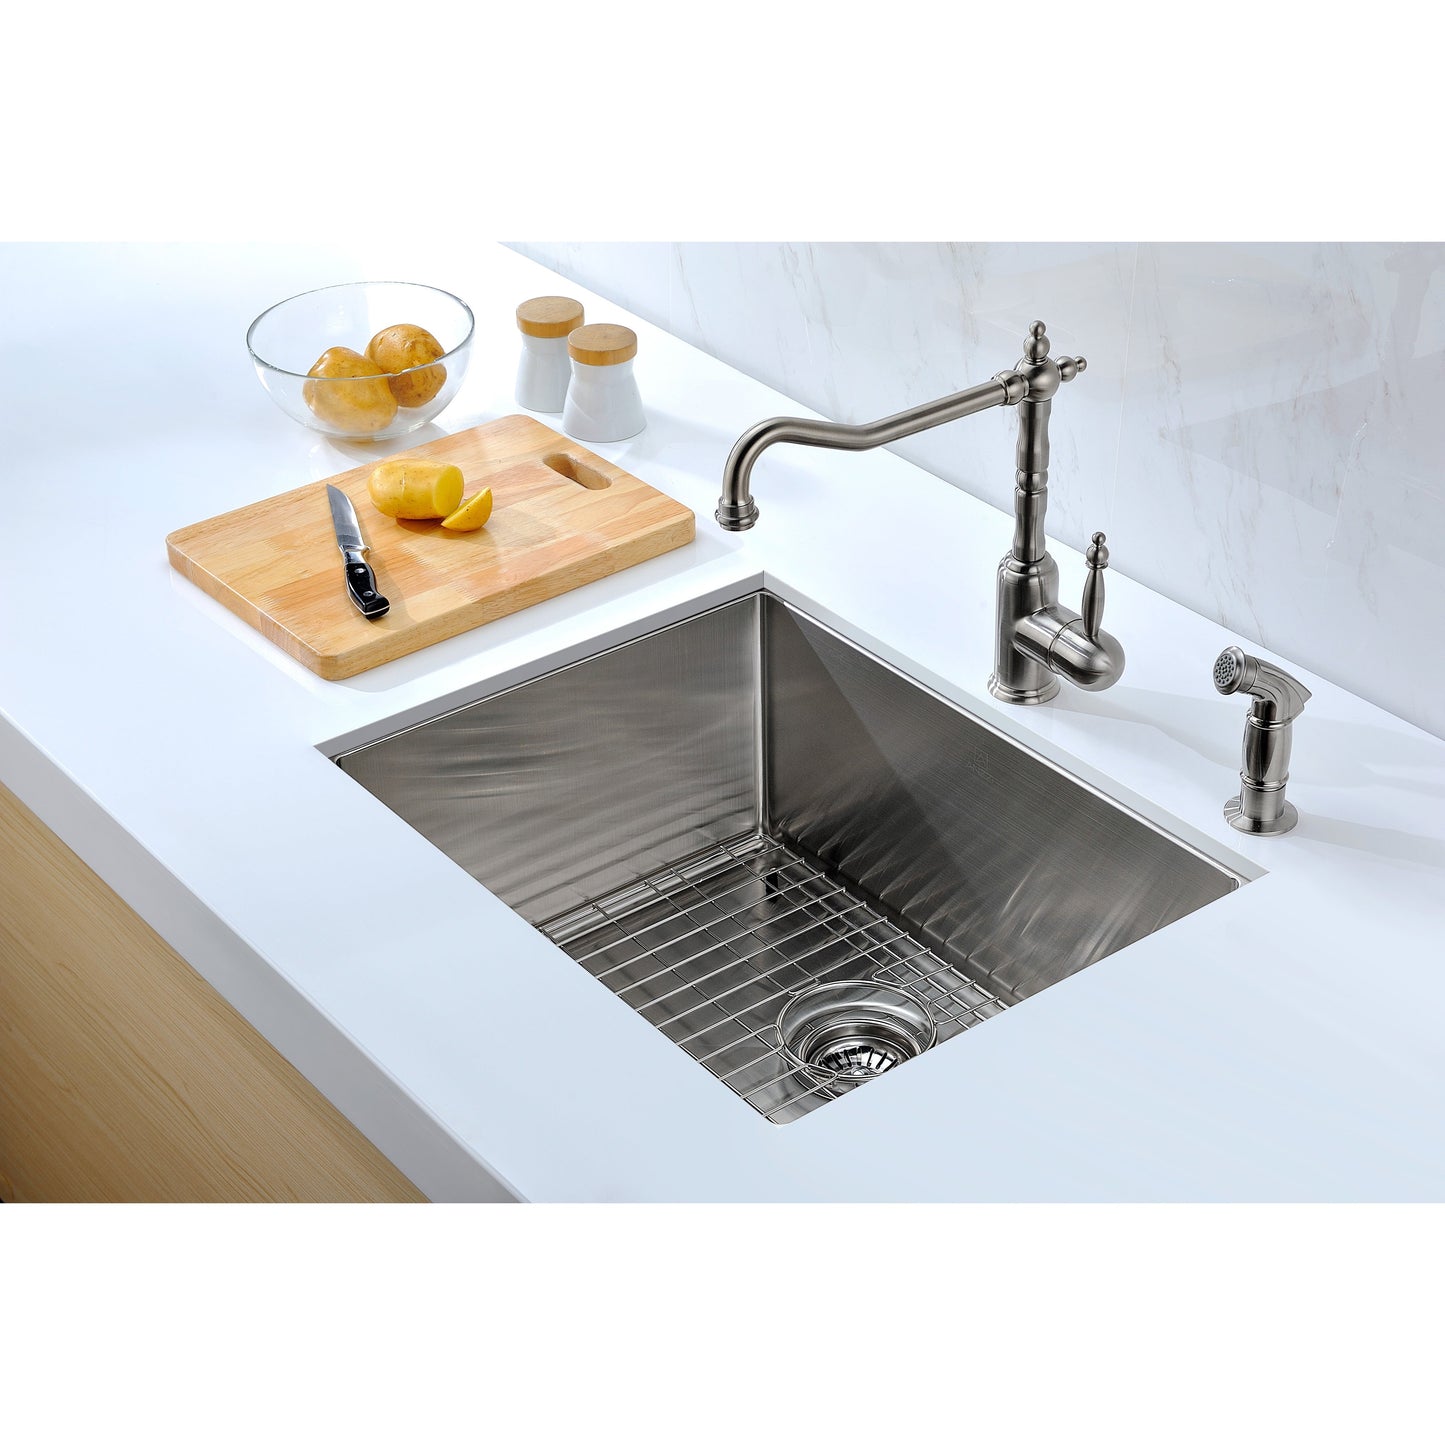 ANZZI Vanguard Series 23" Single Bowl Stainless Steel Undermount Kitchen Sink With Strainer and Drain Assembly